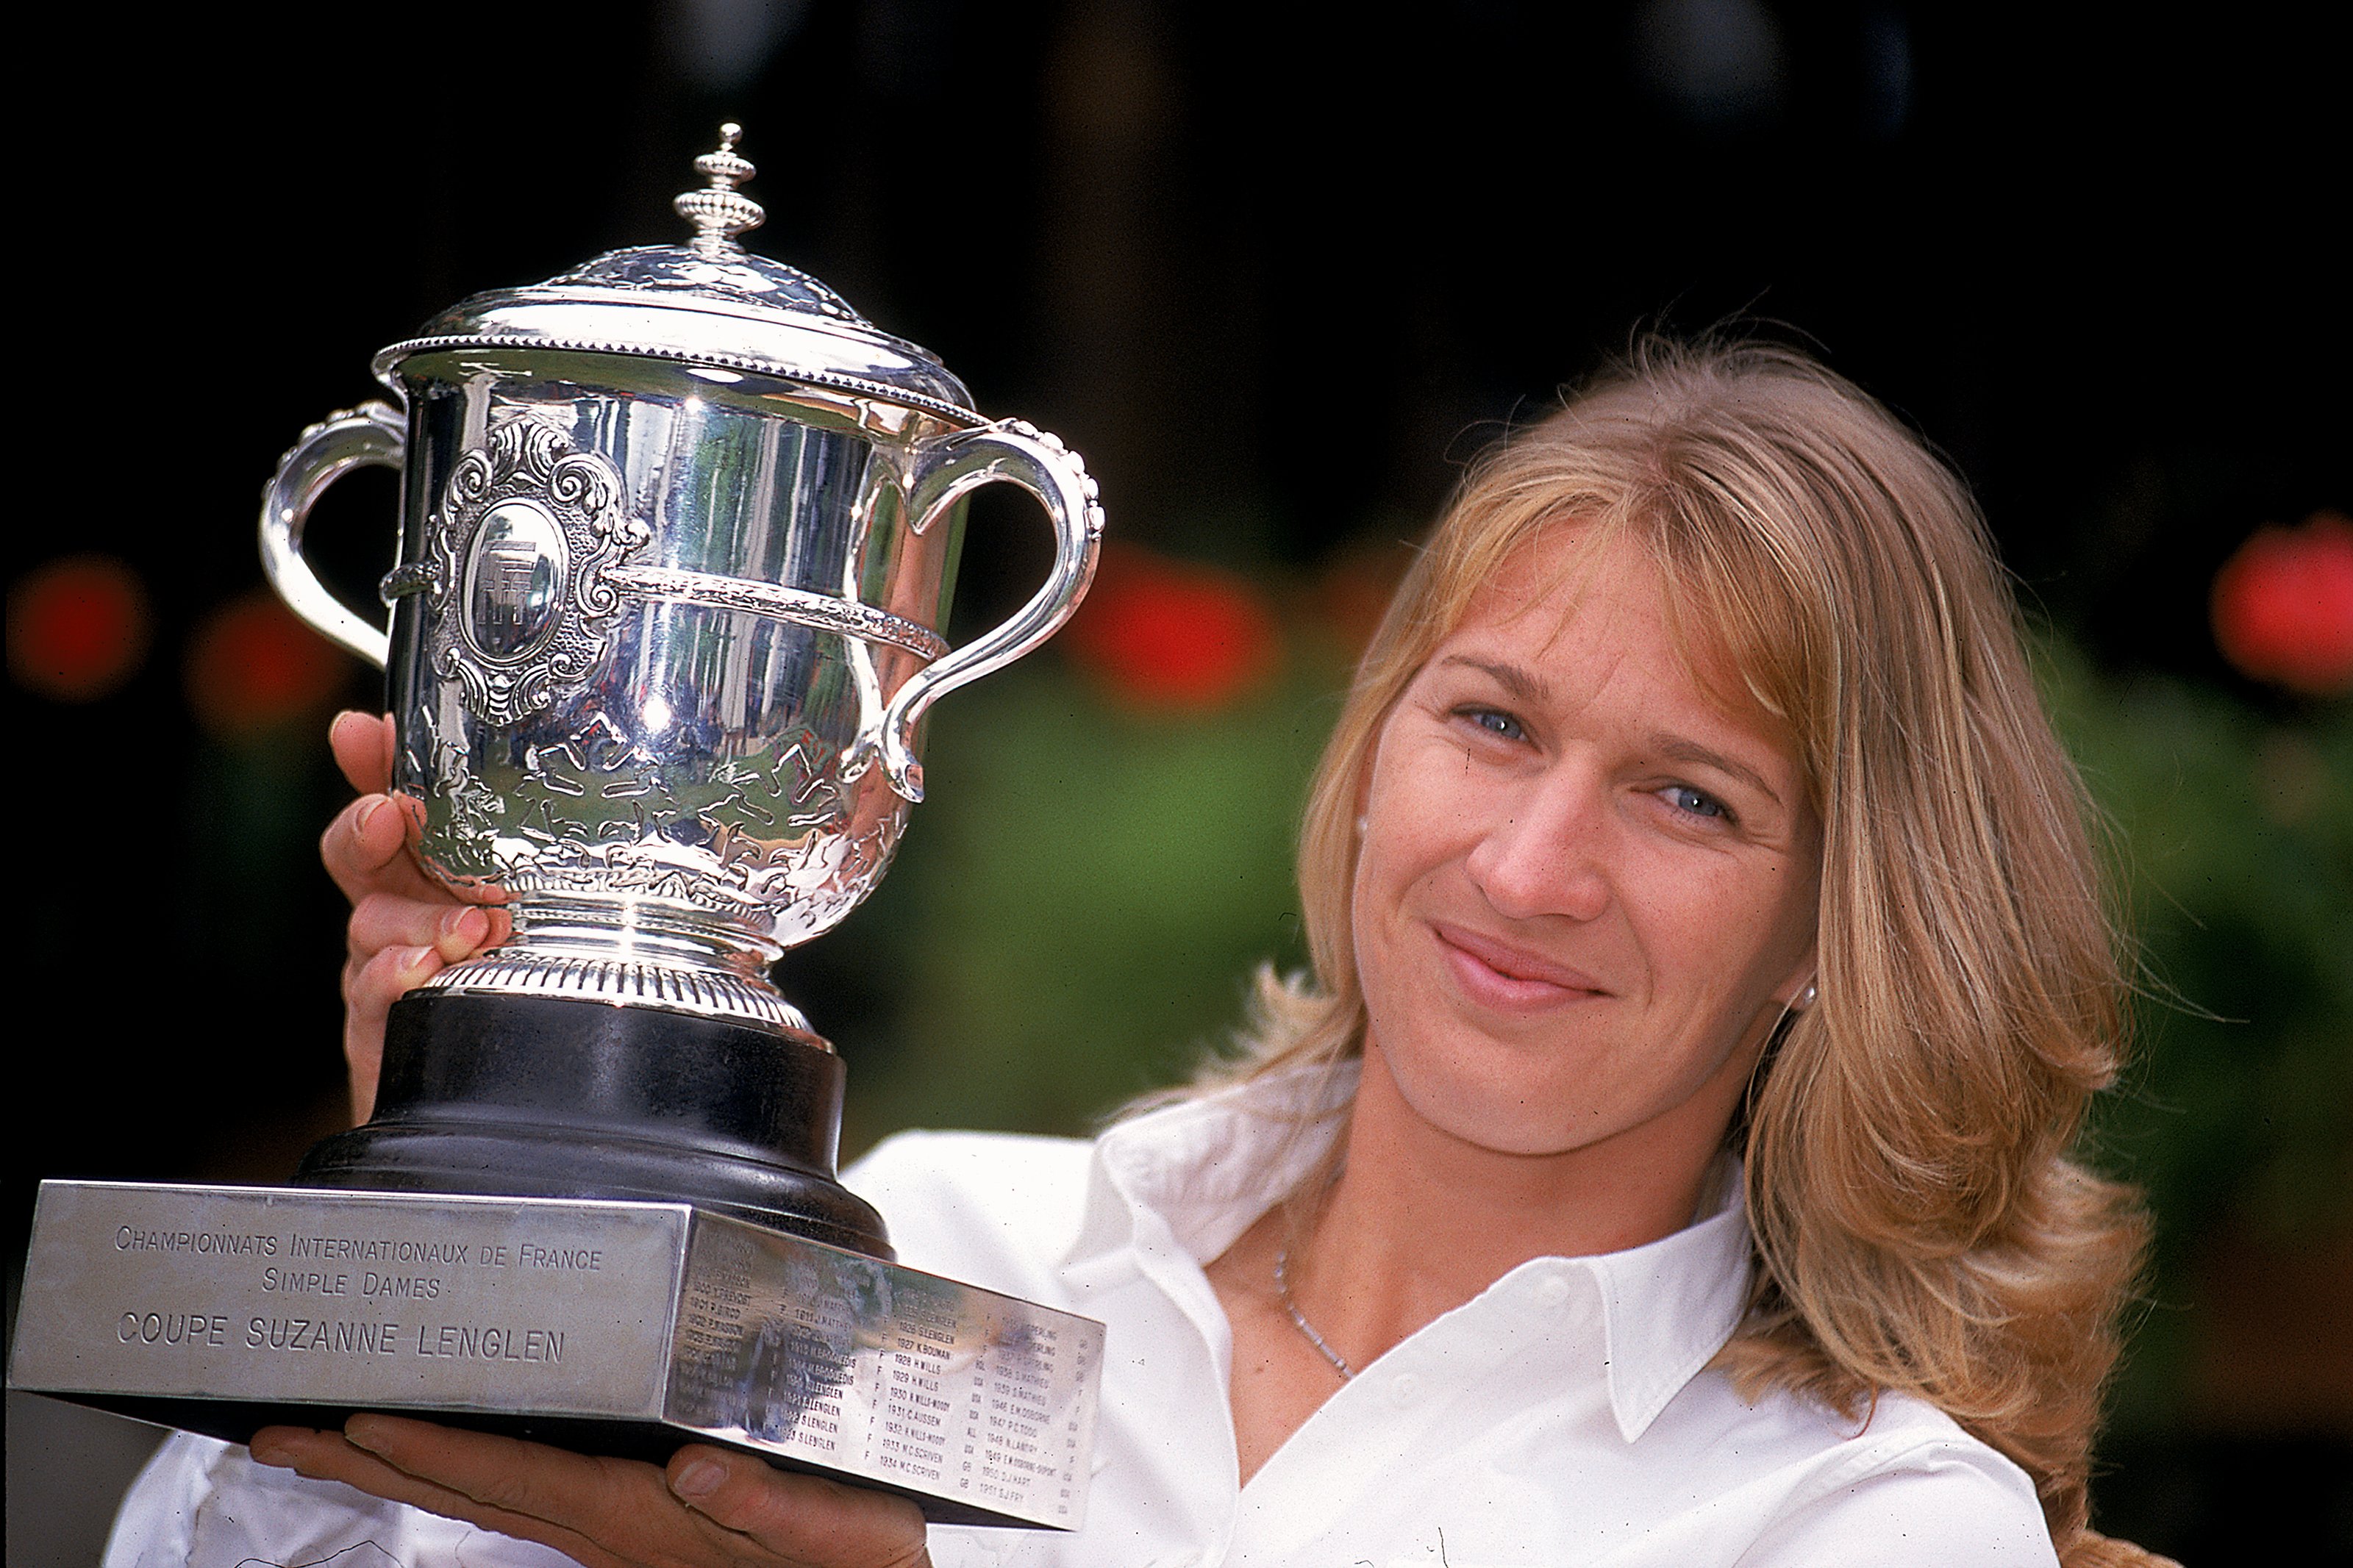 Steffi Graf had just won her 22nd major at the French Open and reached the ...